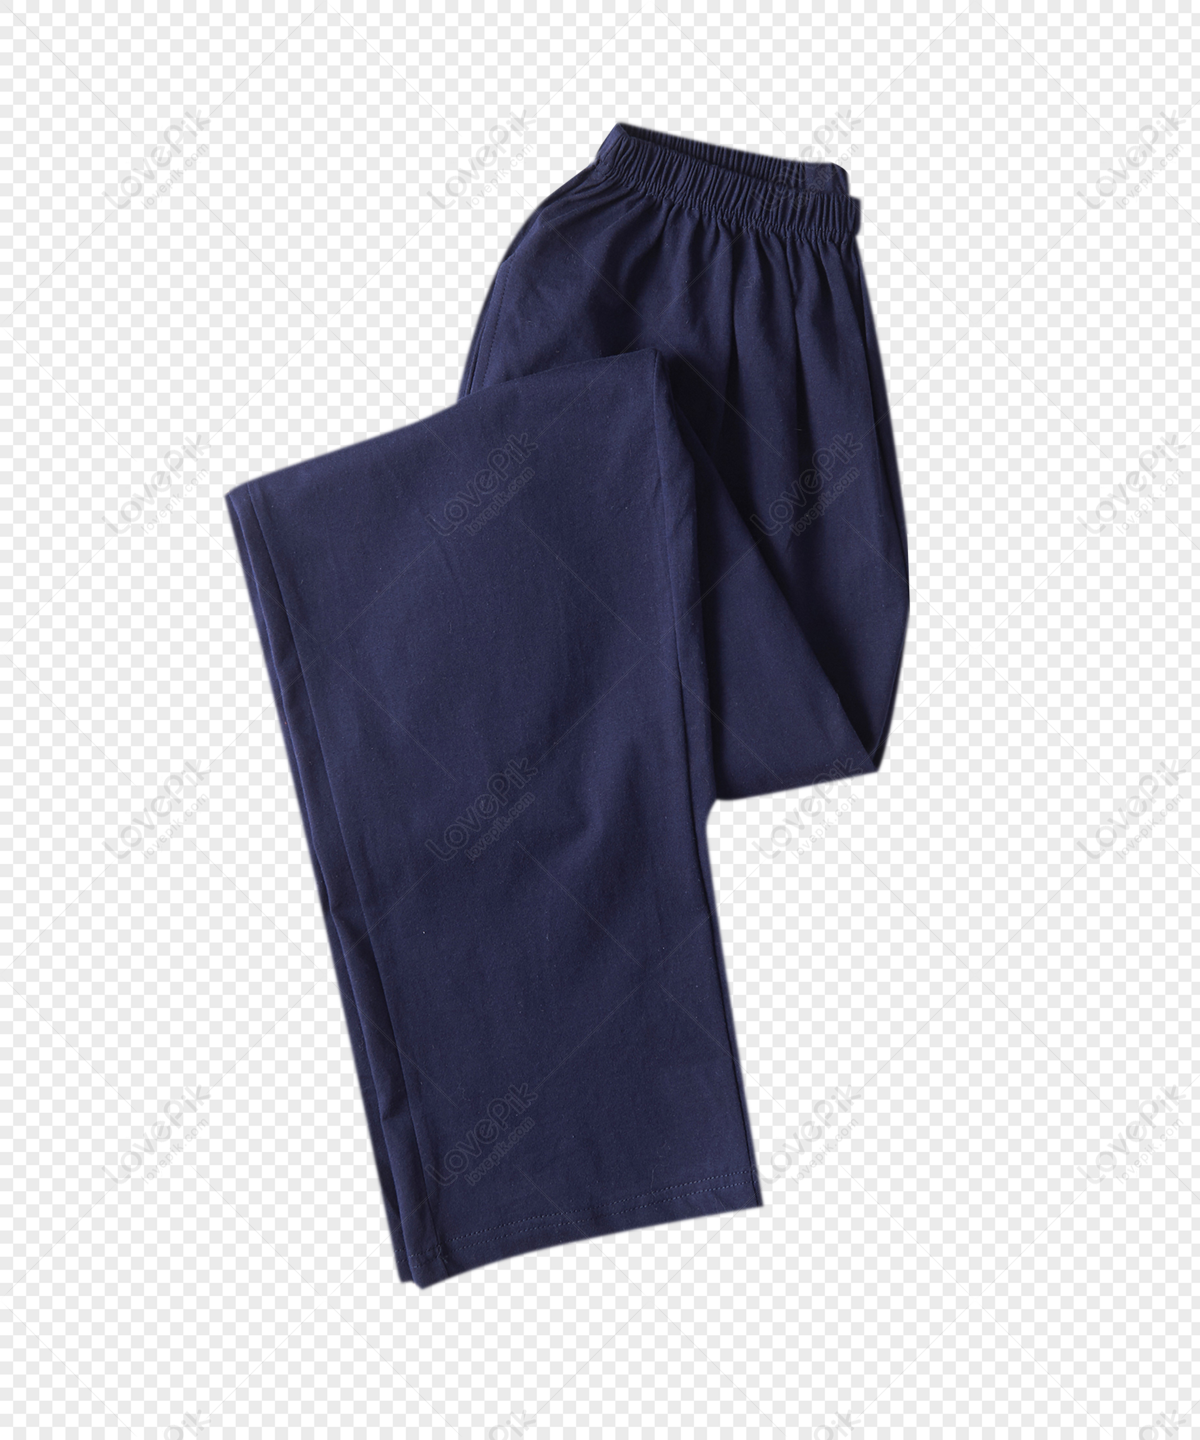 Trousers png images